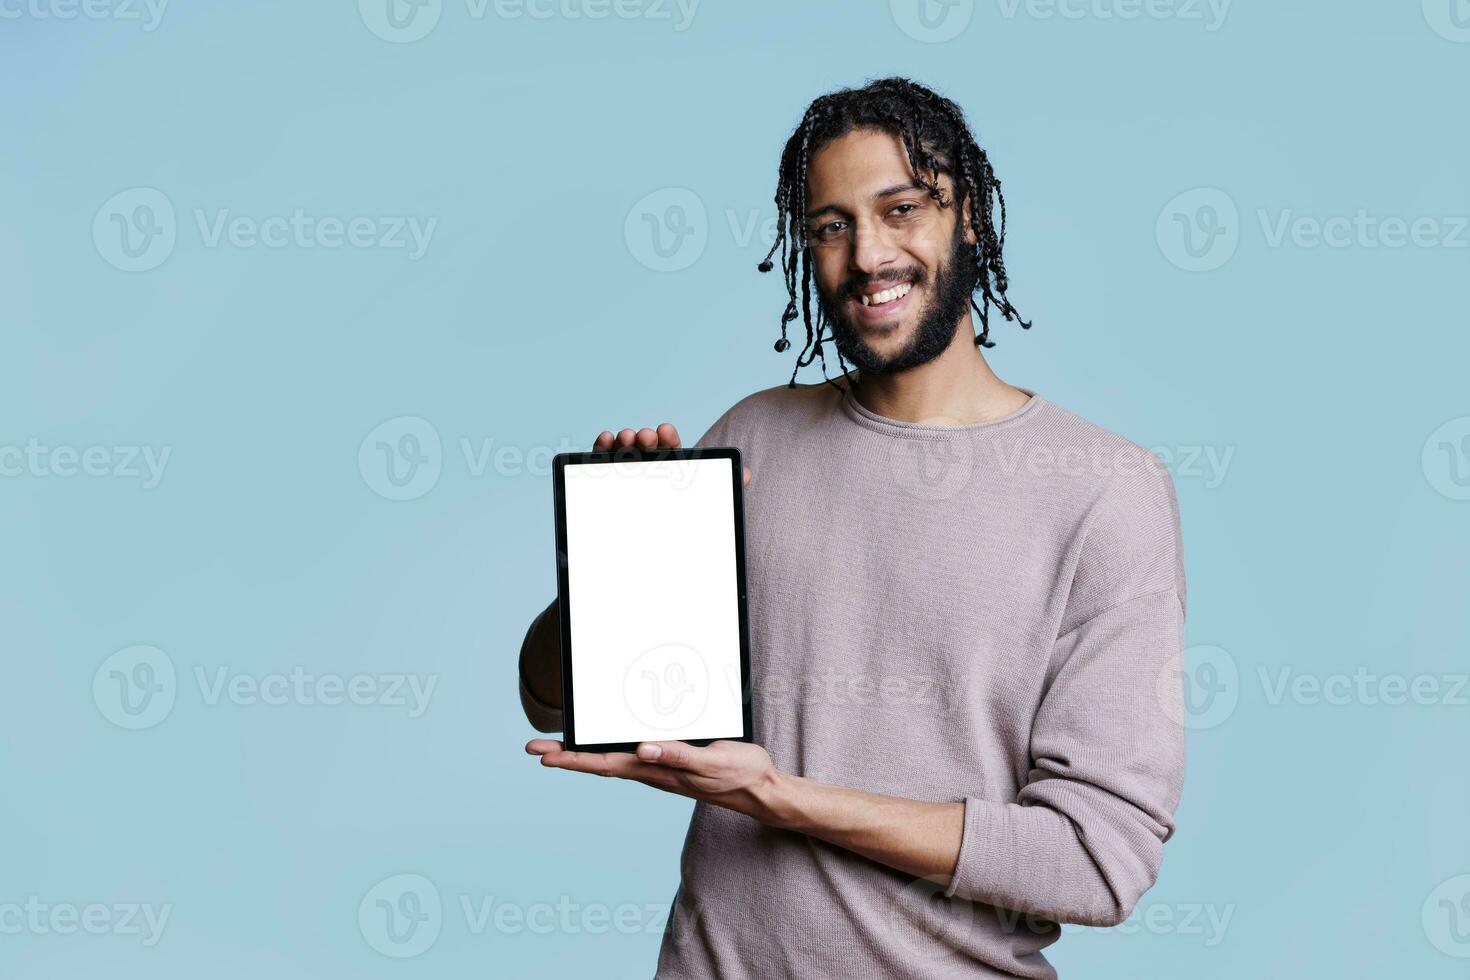 Cheerful arab man holding digital tablet with blank touchscreen and looking at camera. Smiling person showing portable device with empty white screen background for software ads photo